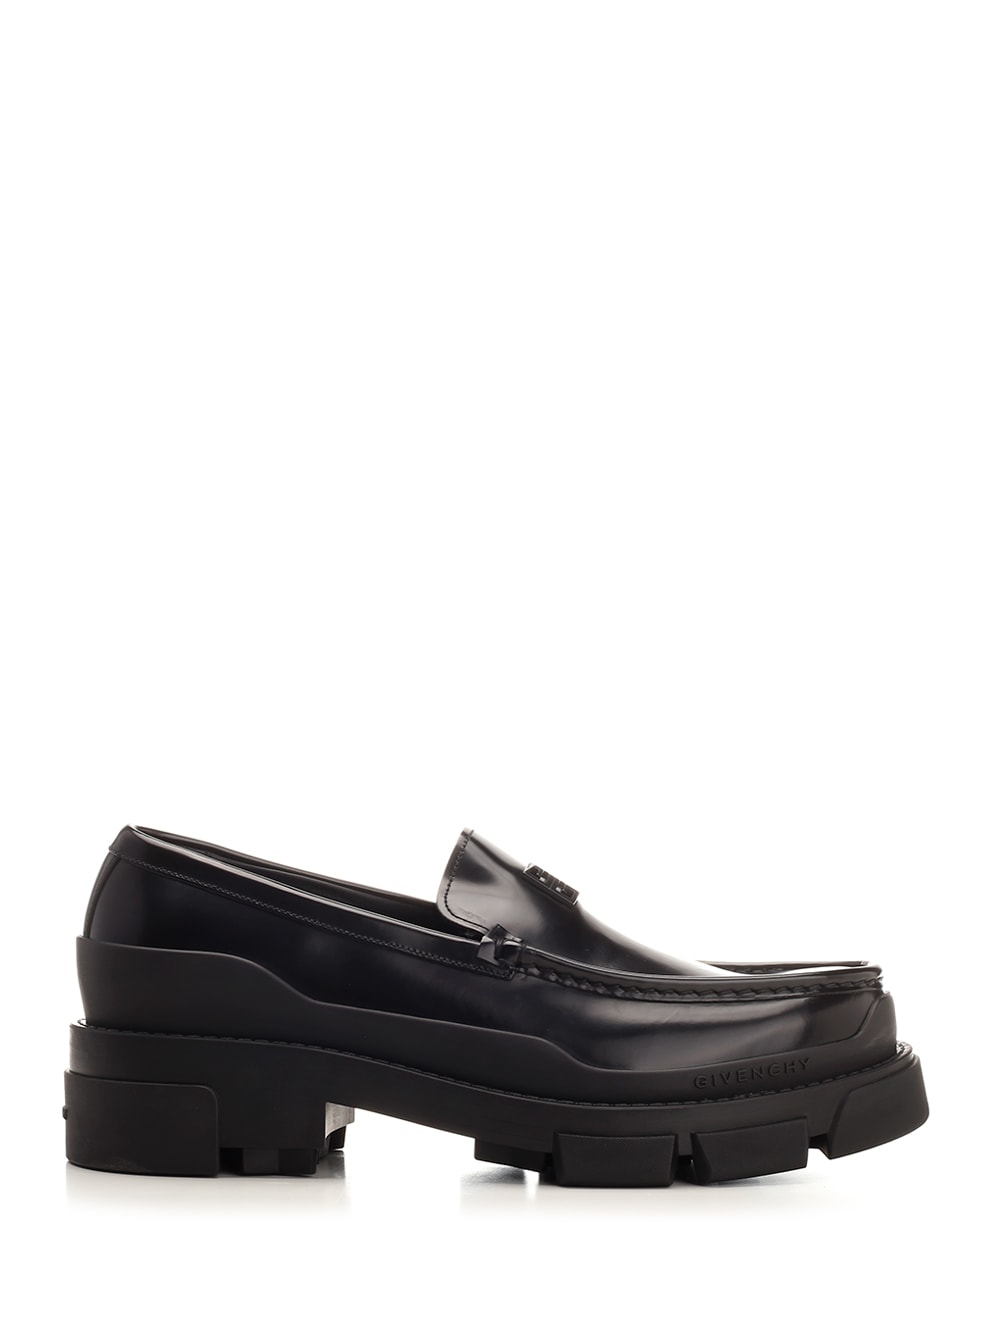 GIVENCHY BLACK LEATHER LOAFERS